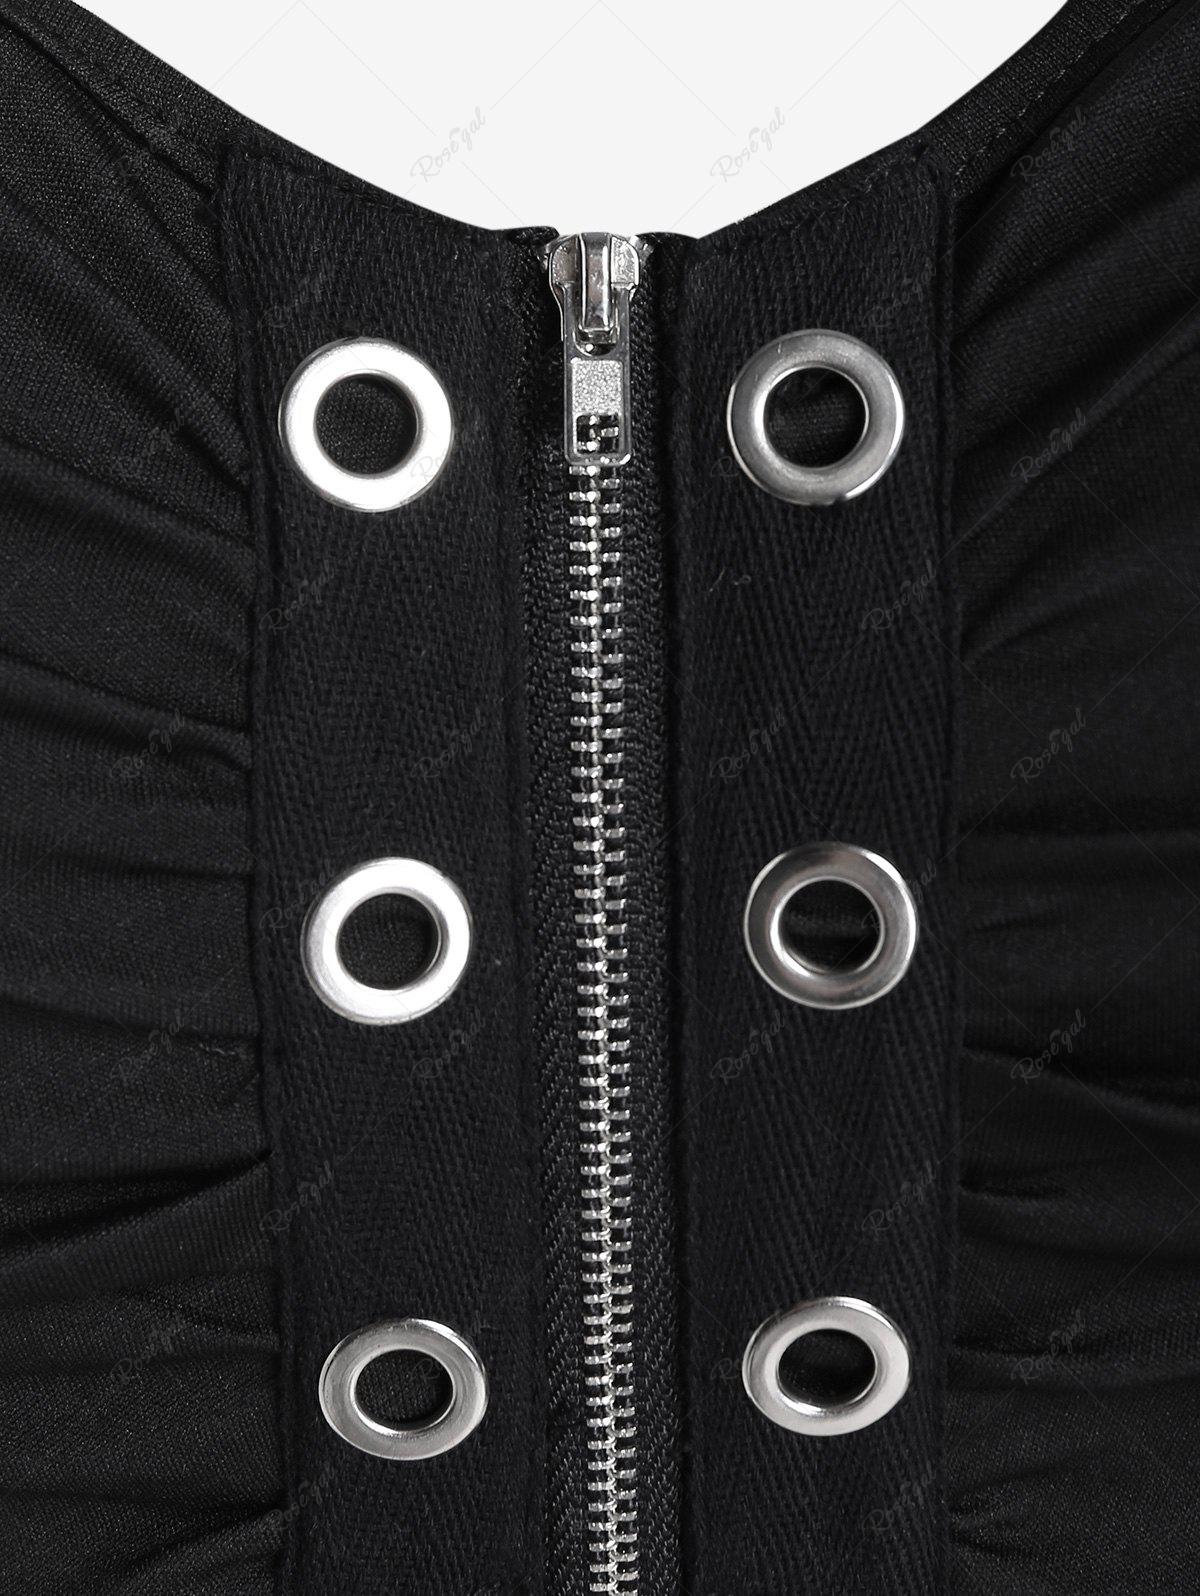 Gothic Lace Up Grommets Full Zipper Tank Top